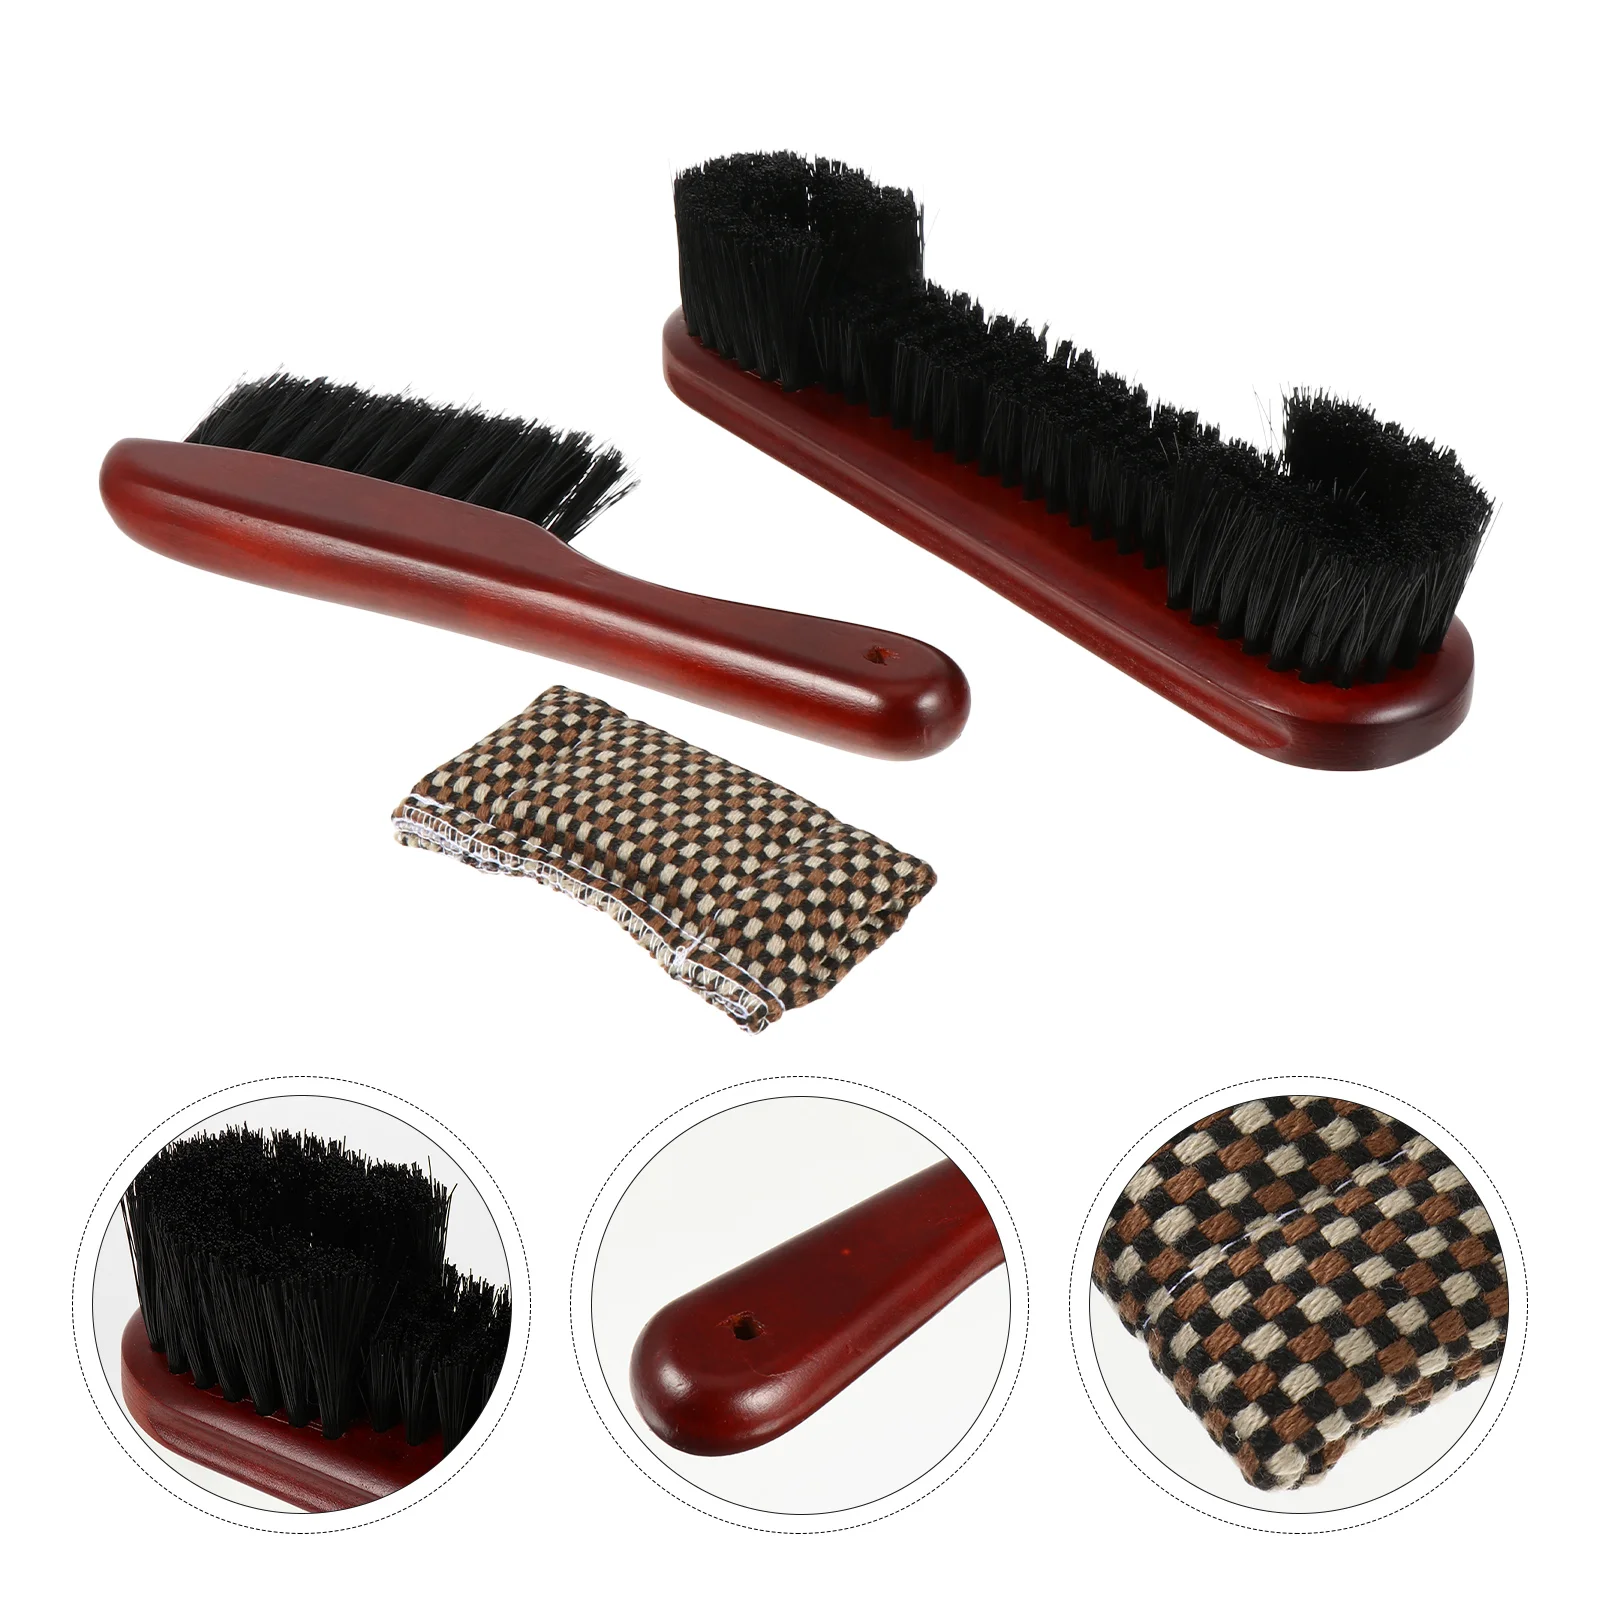 Billiard Brush Set Cleaning Brushes Pool Table Accessories Billiards Snooker Cloth Cue Towel Cleaner